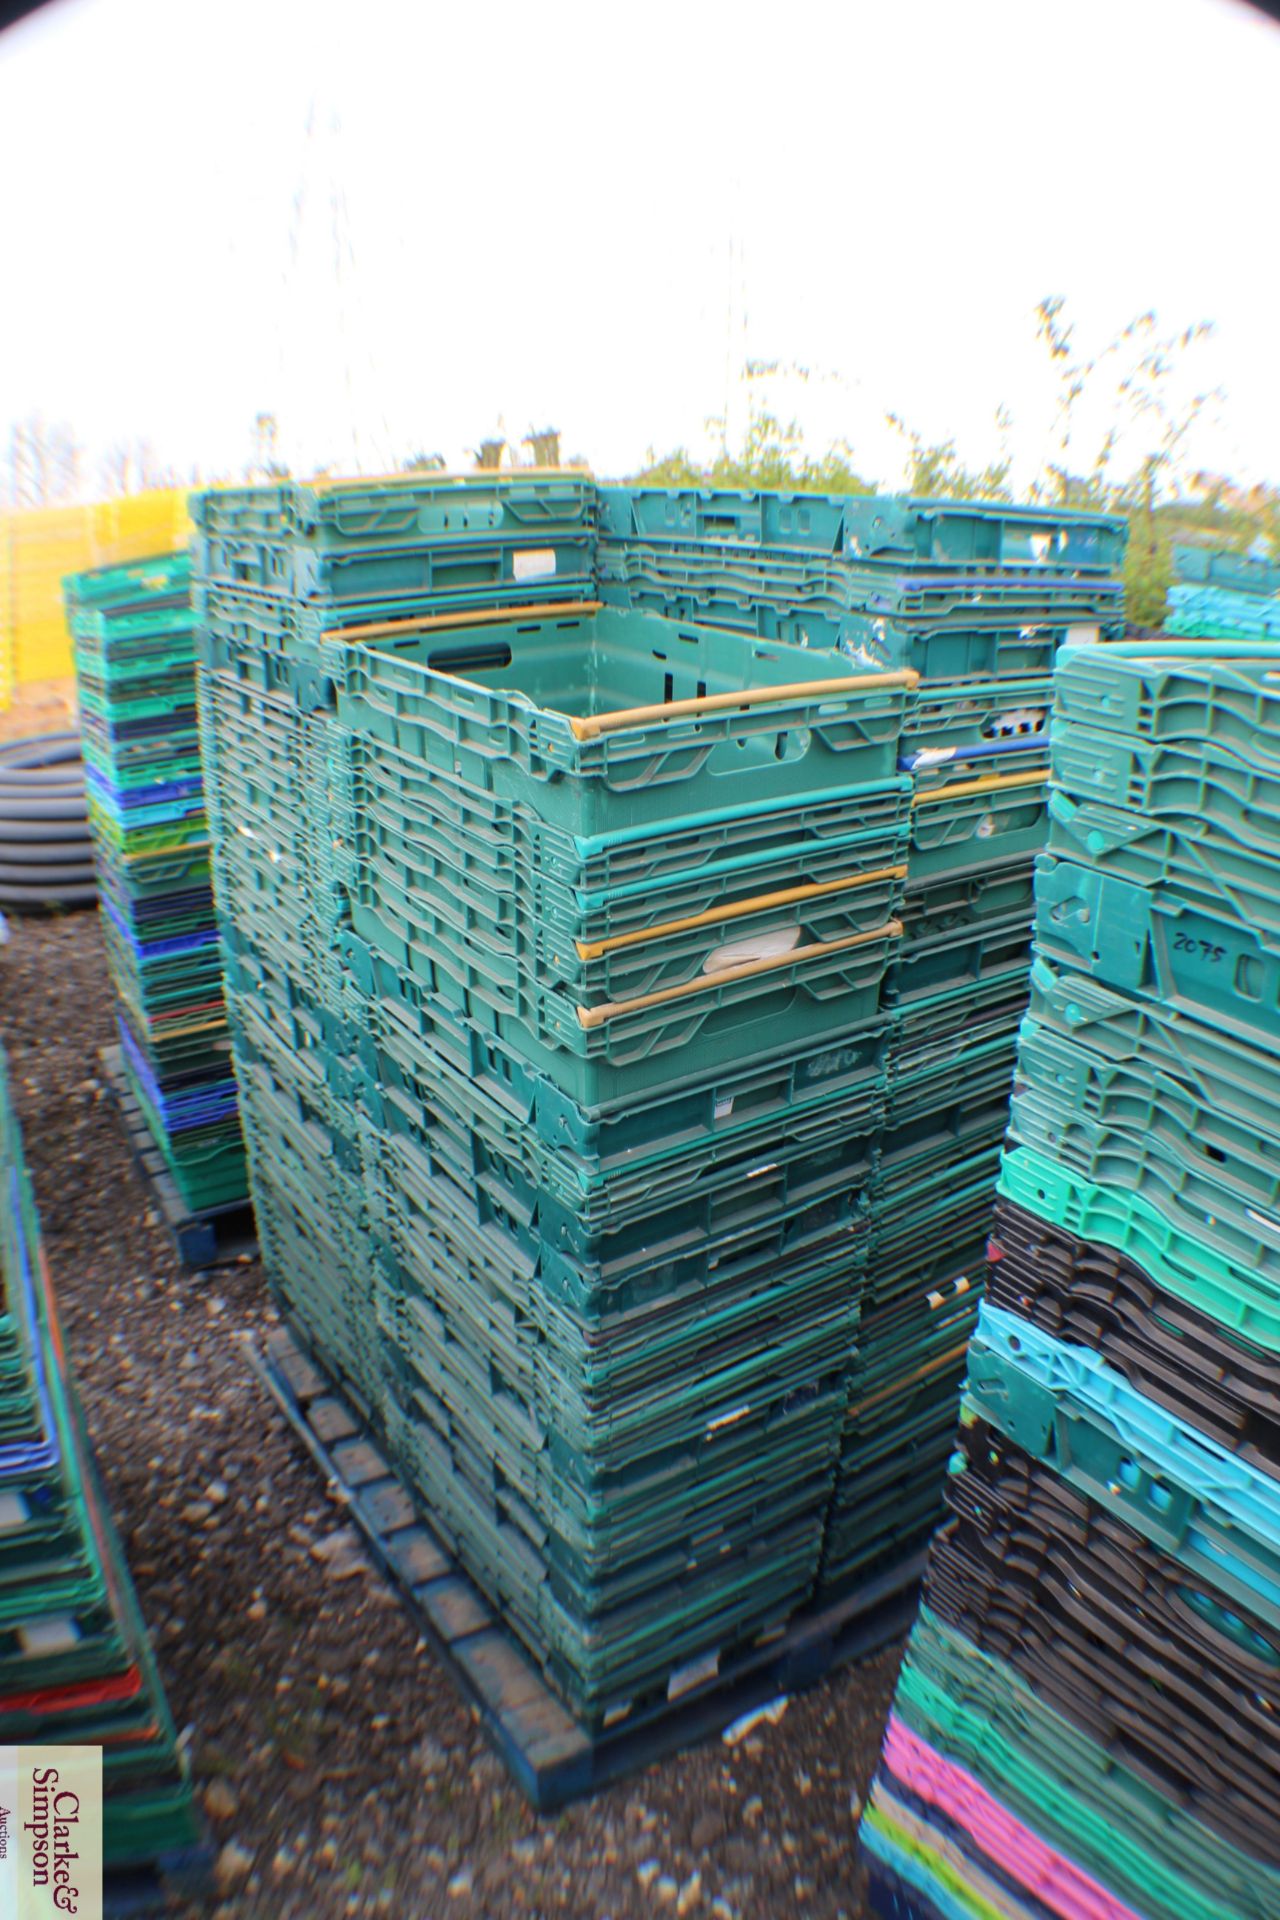 c.100x vegetable/ produce stacking crates. - Image 2 of 2